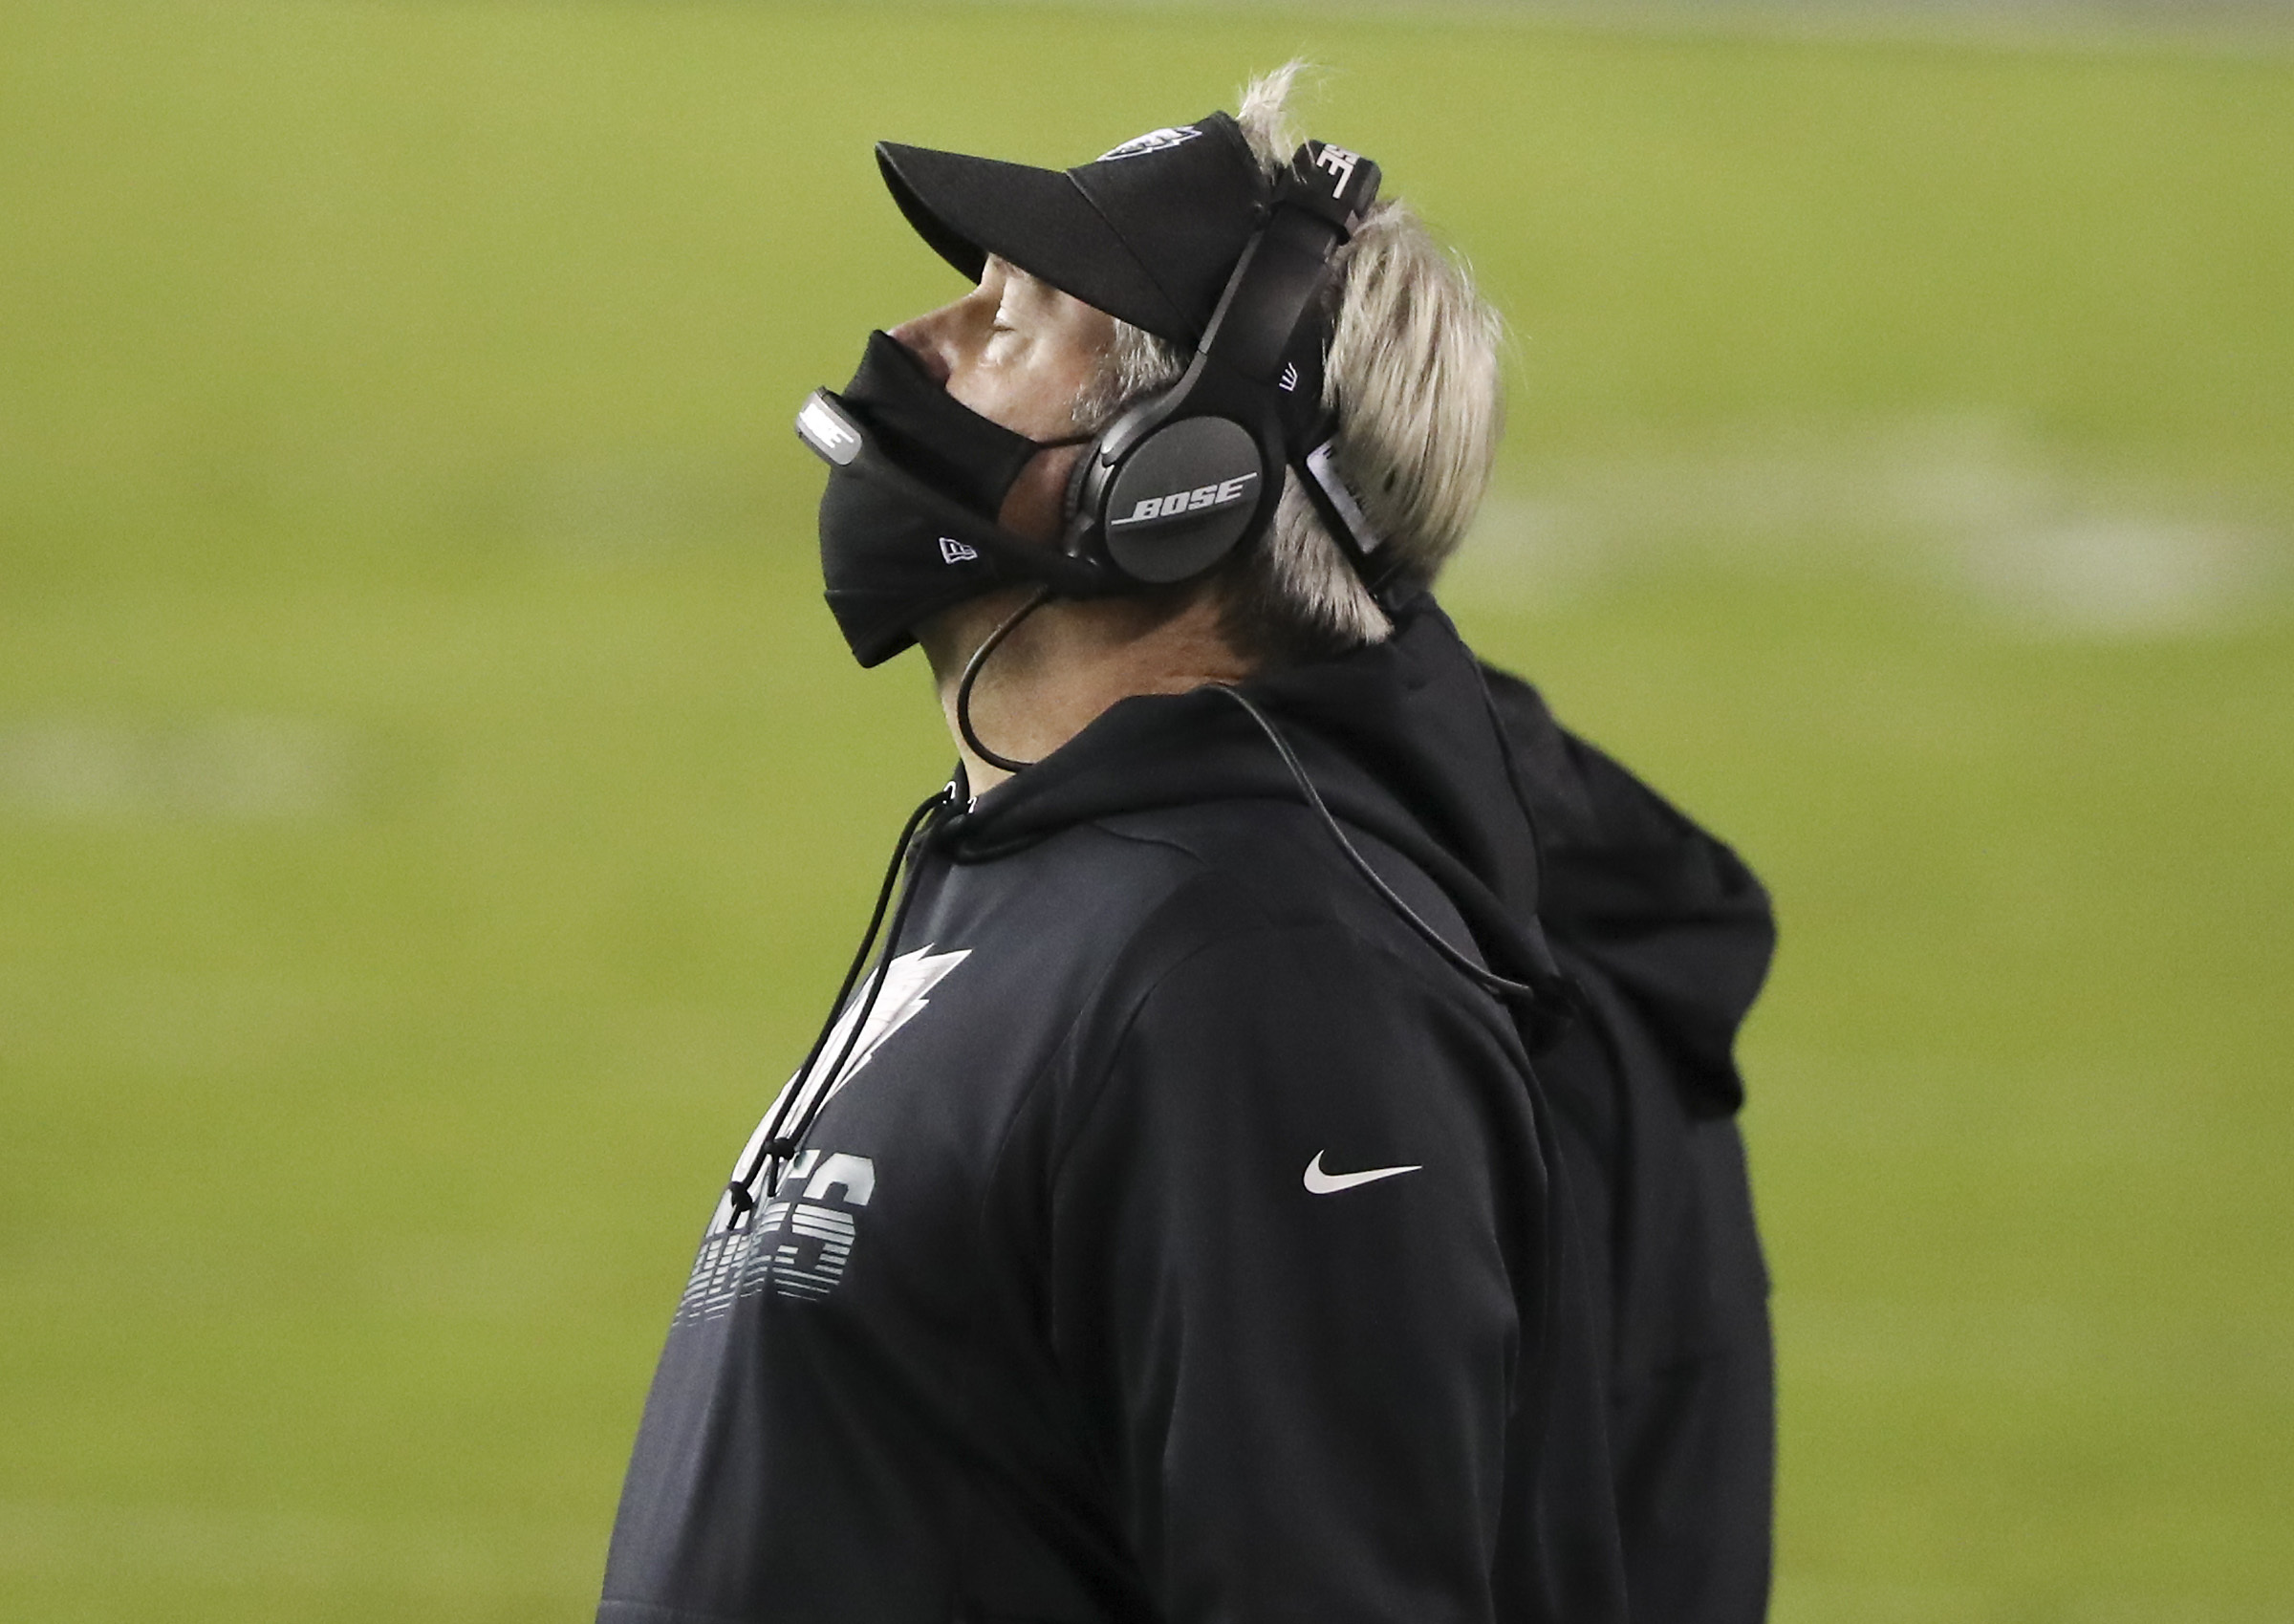 Doug Pederson on hot seat amid growing Eagles disaster